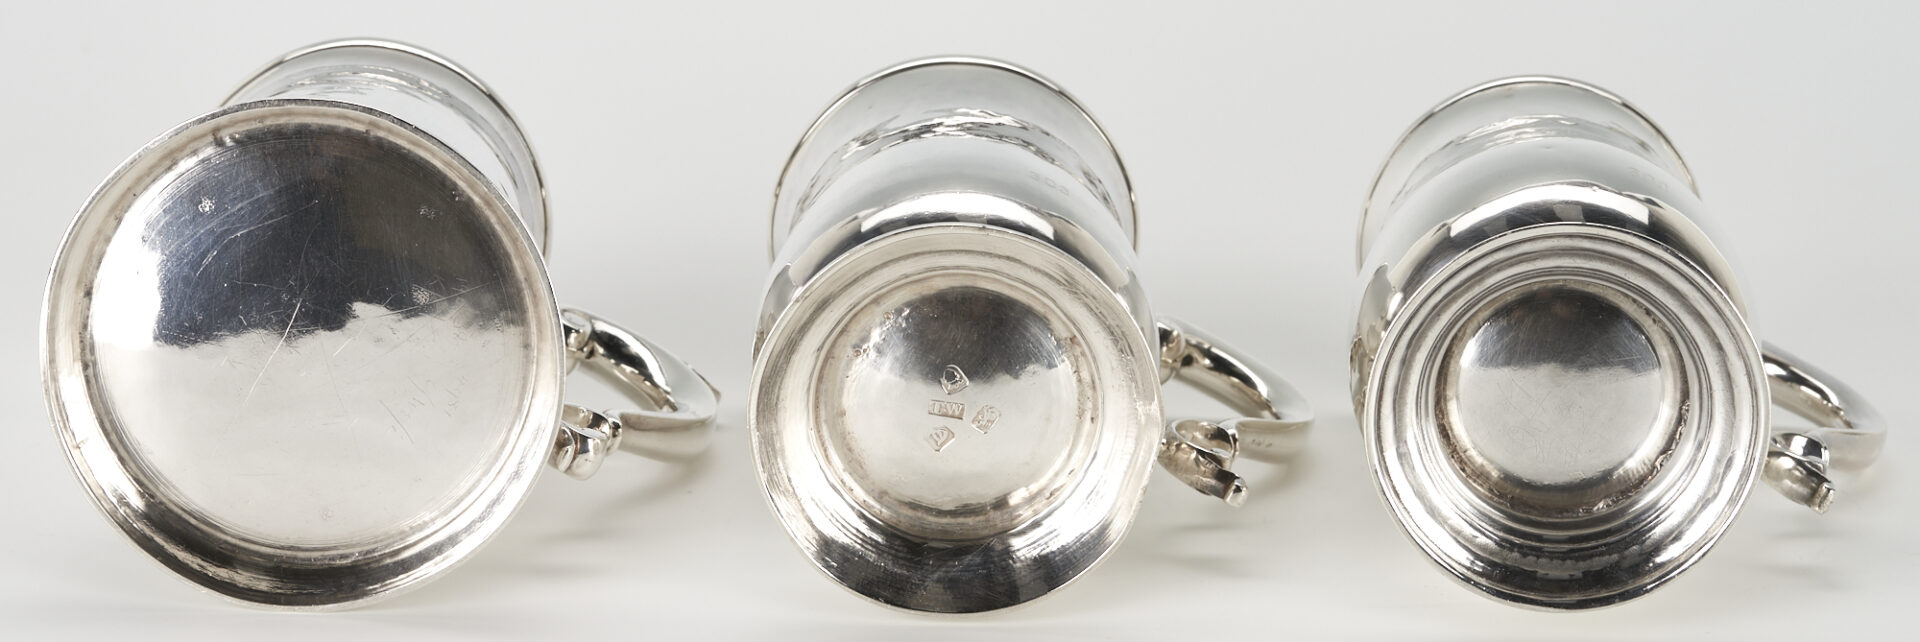 Lot 52: 3 English 18th C. Sterling Silver Mugs or Canns